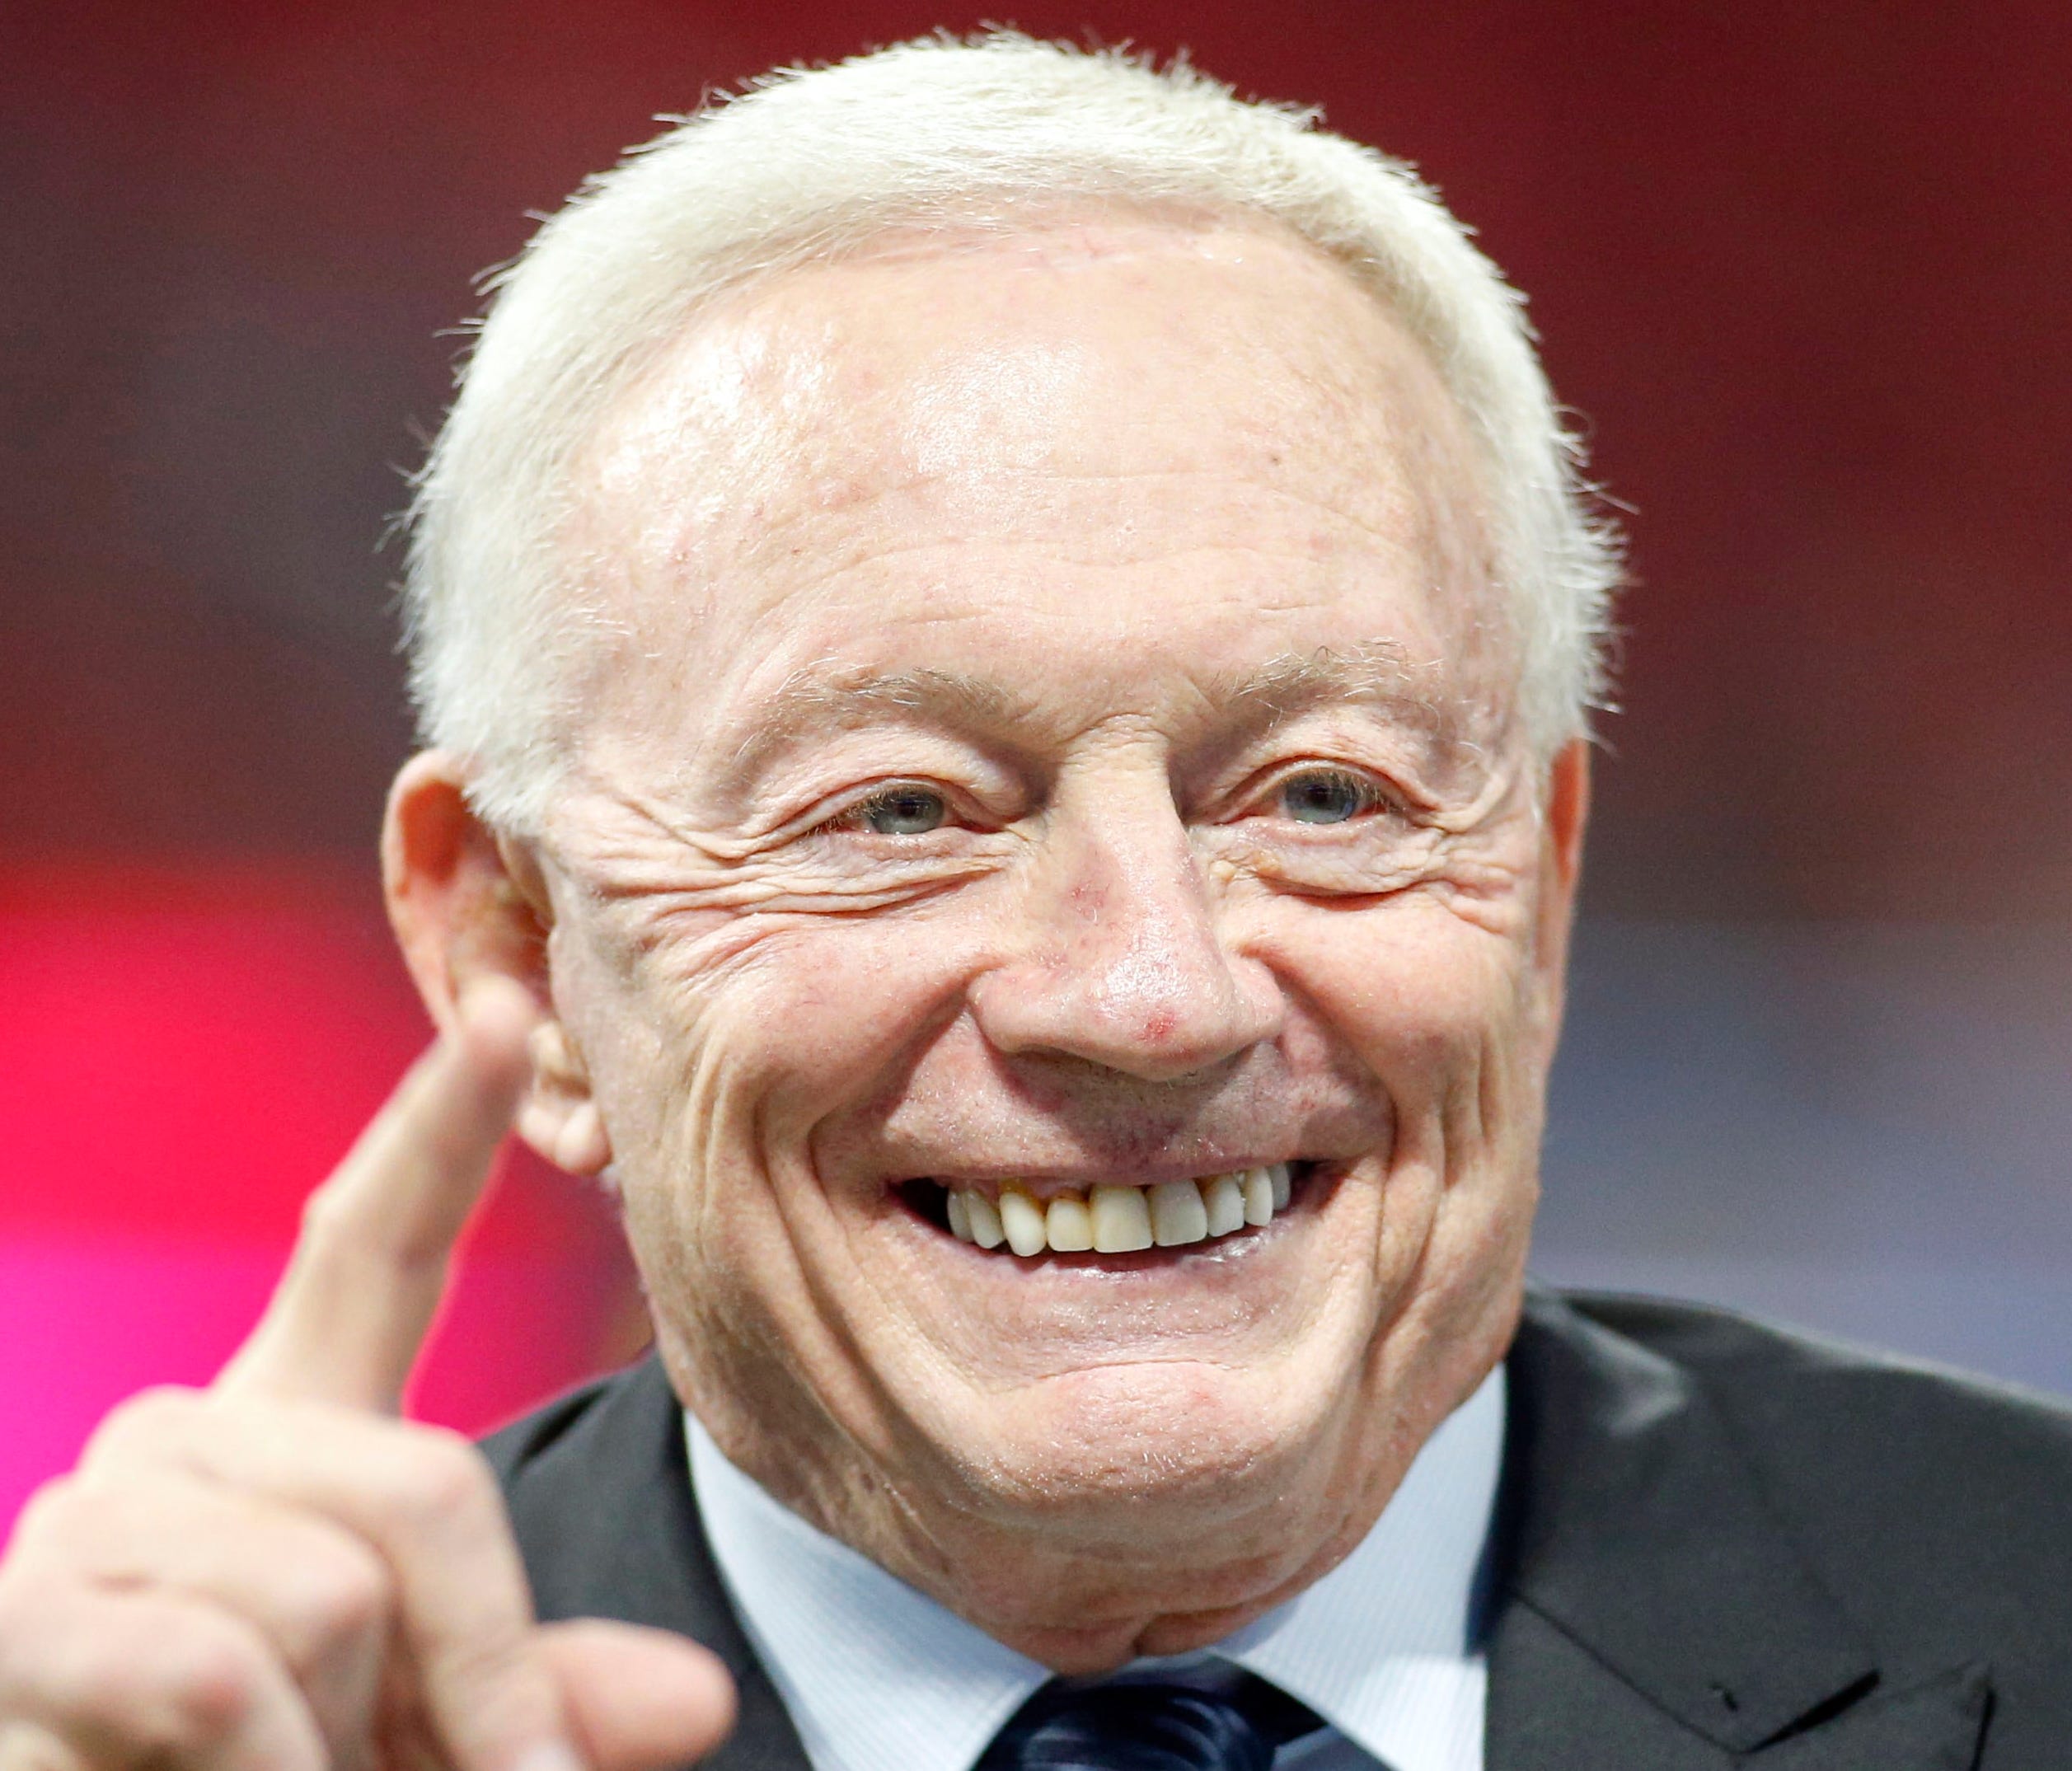 Dallas Cowboys owner Jerry Jones' smile belies his anger toward NFL commissioner Roger Goodell and Atlanta Falcons owner Arthur Blank, before Sunday's game in Atlanta.